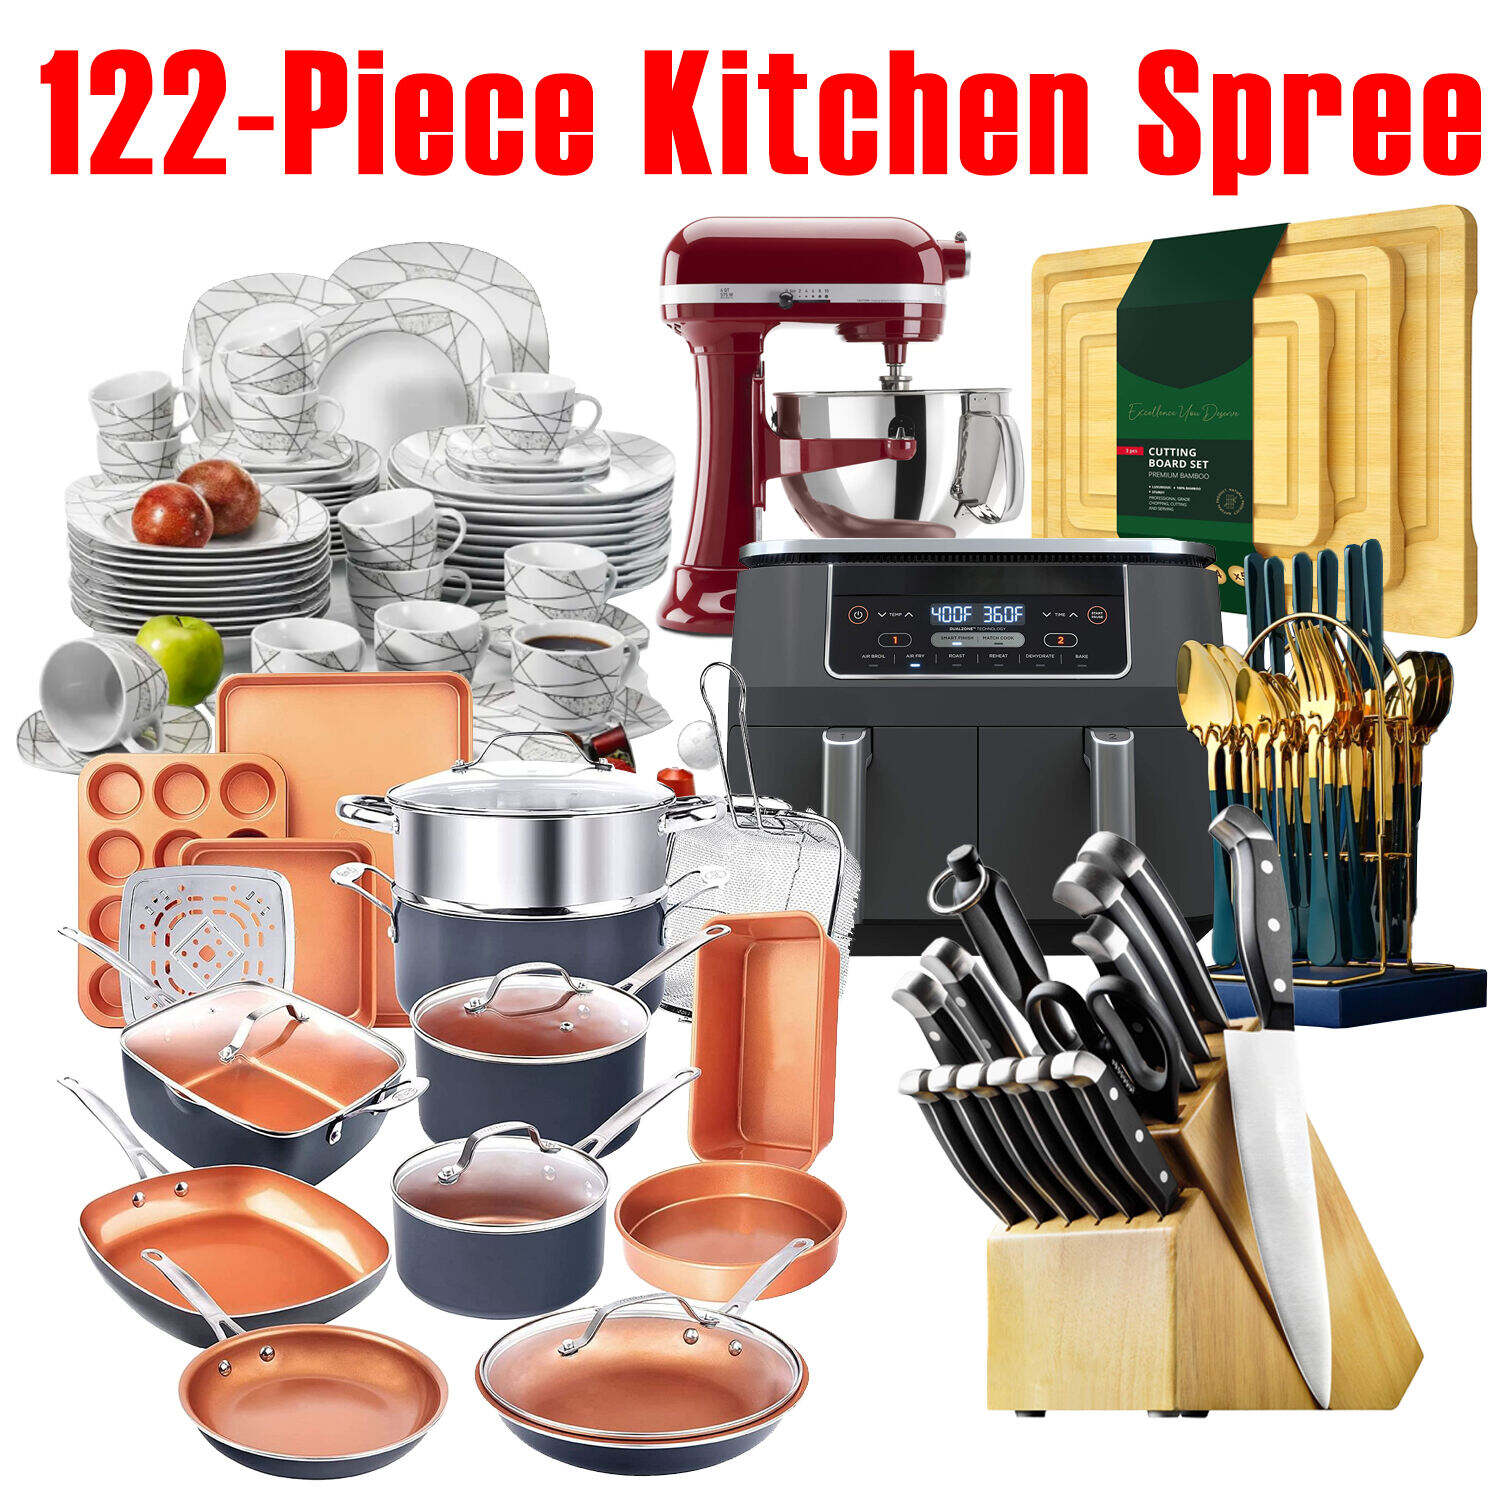 Limited-time Promotion. 122-piece Kitchen Spree. Meeting All The Needs Of The Kitchen